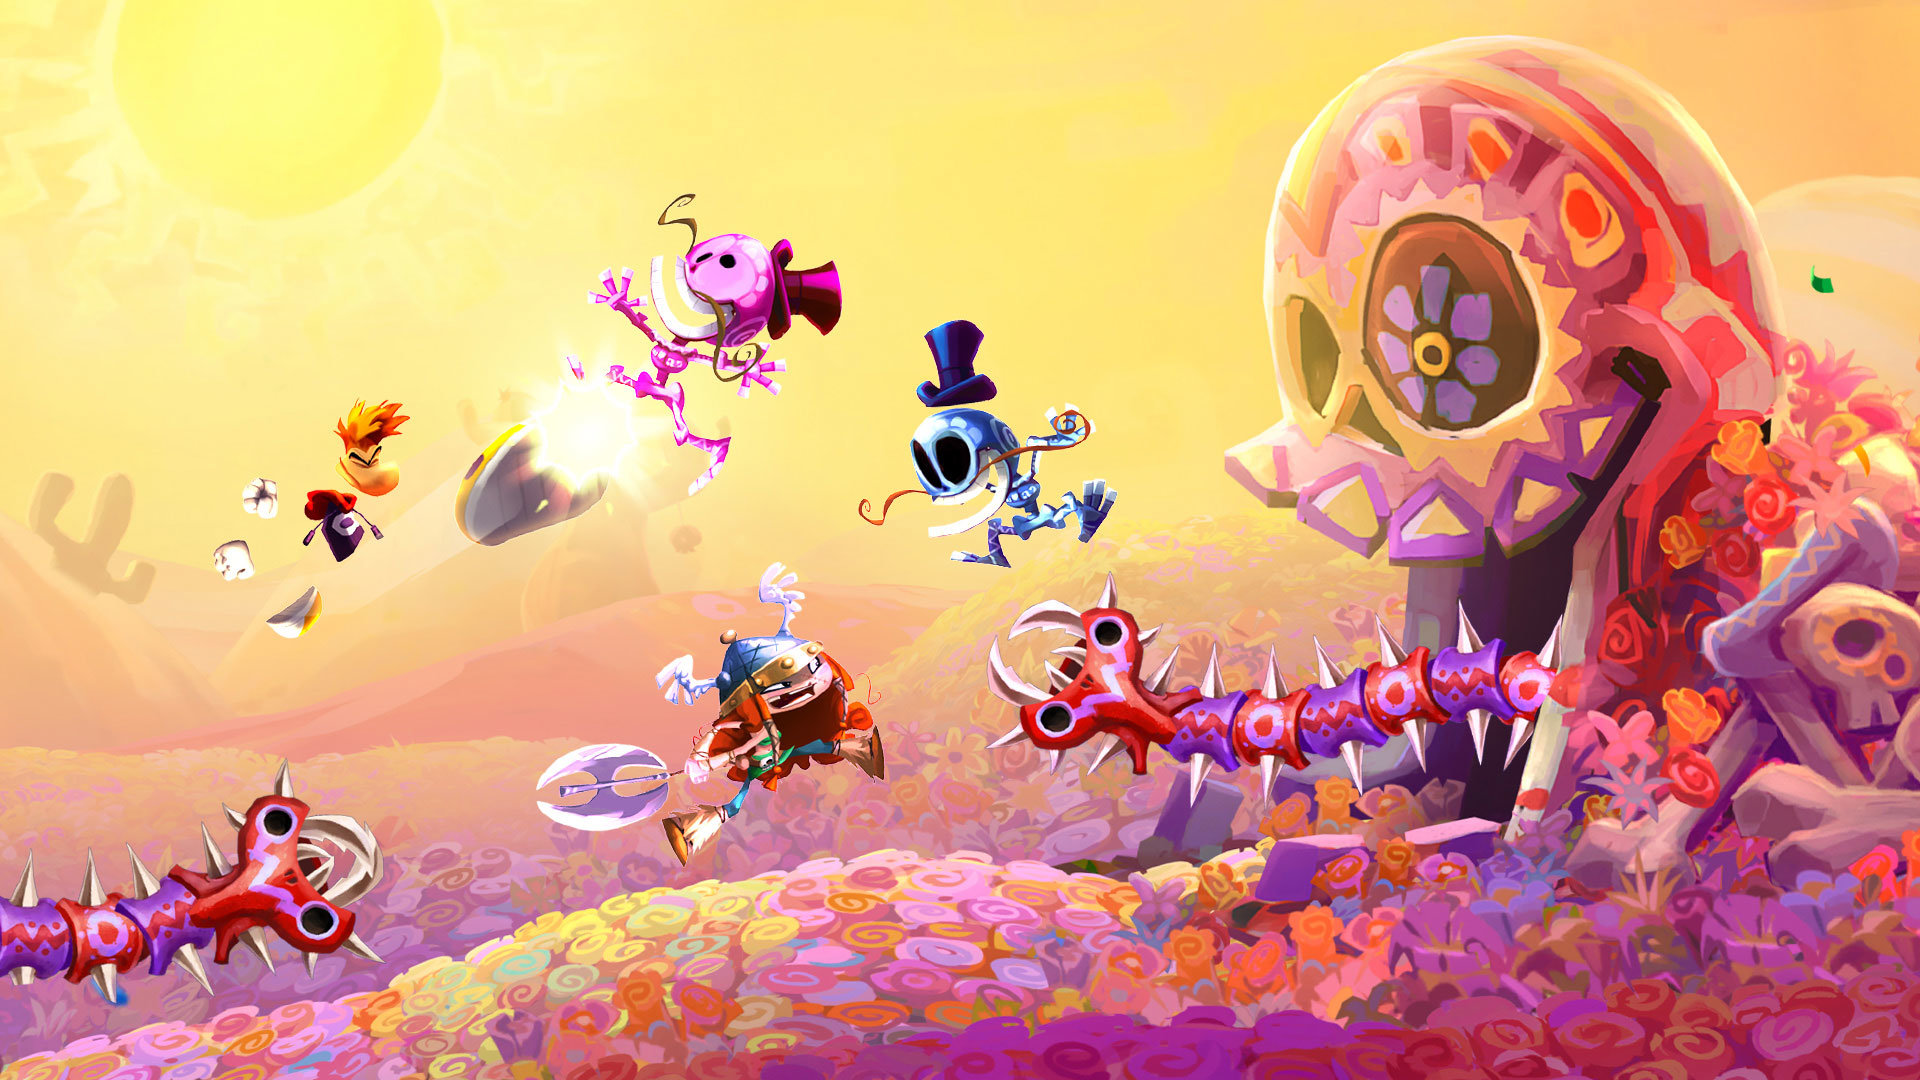 Download full hd 1920x1080 Rayman Legends computer background ID:26542 for free